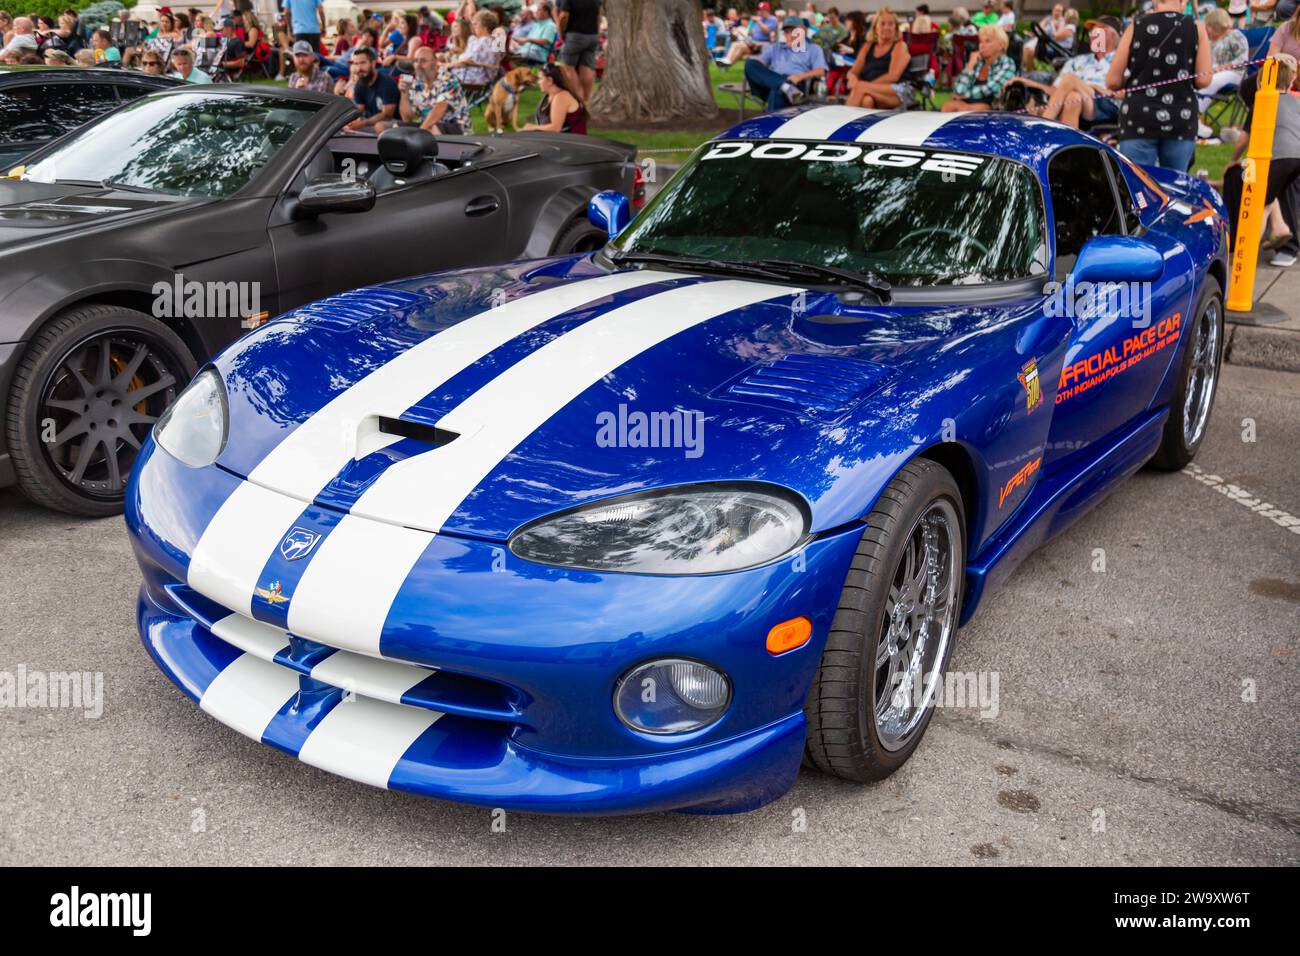 This blue 1996 Dodge Viper Indianapolis 500 Pace Car is on display as part of the Fast and Fabulous car show in downtown Auburn, Indiana, USA. Stock Photo